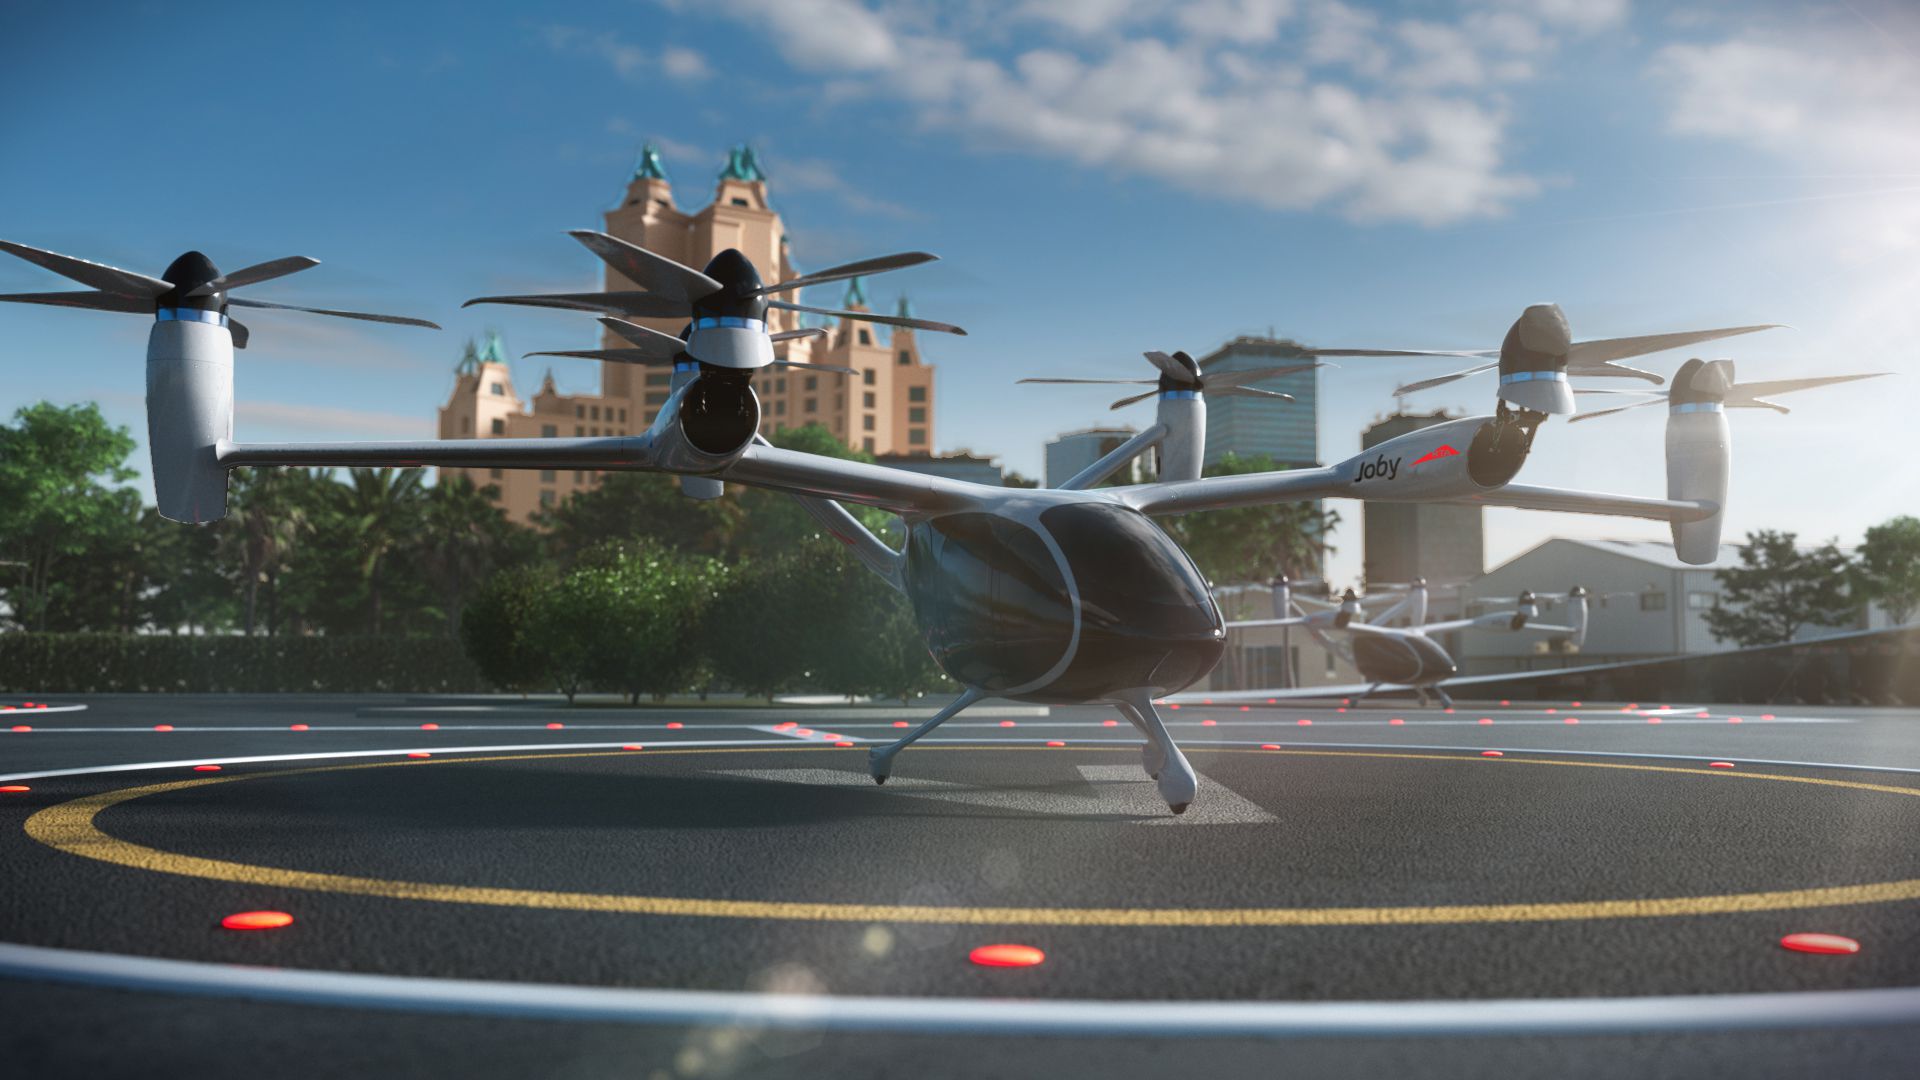 flying taxis in dubai: a look at the electric aircraft coming in 2026